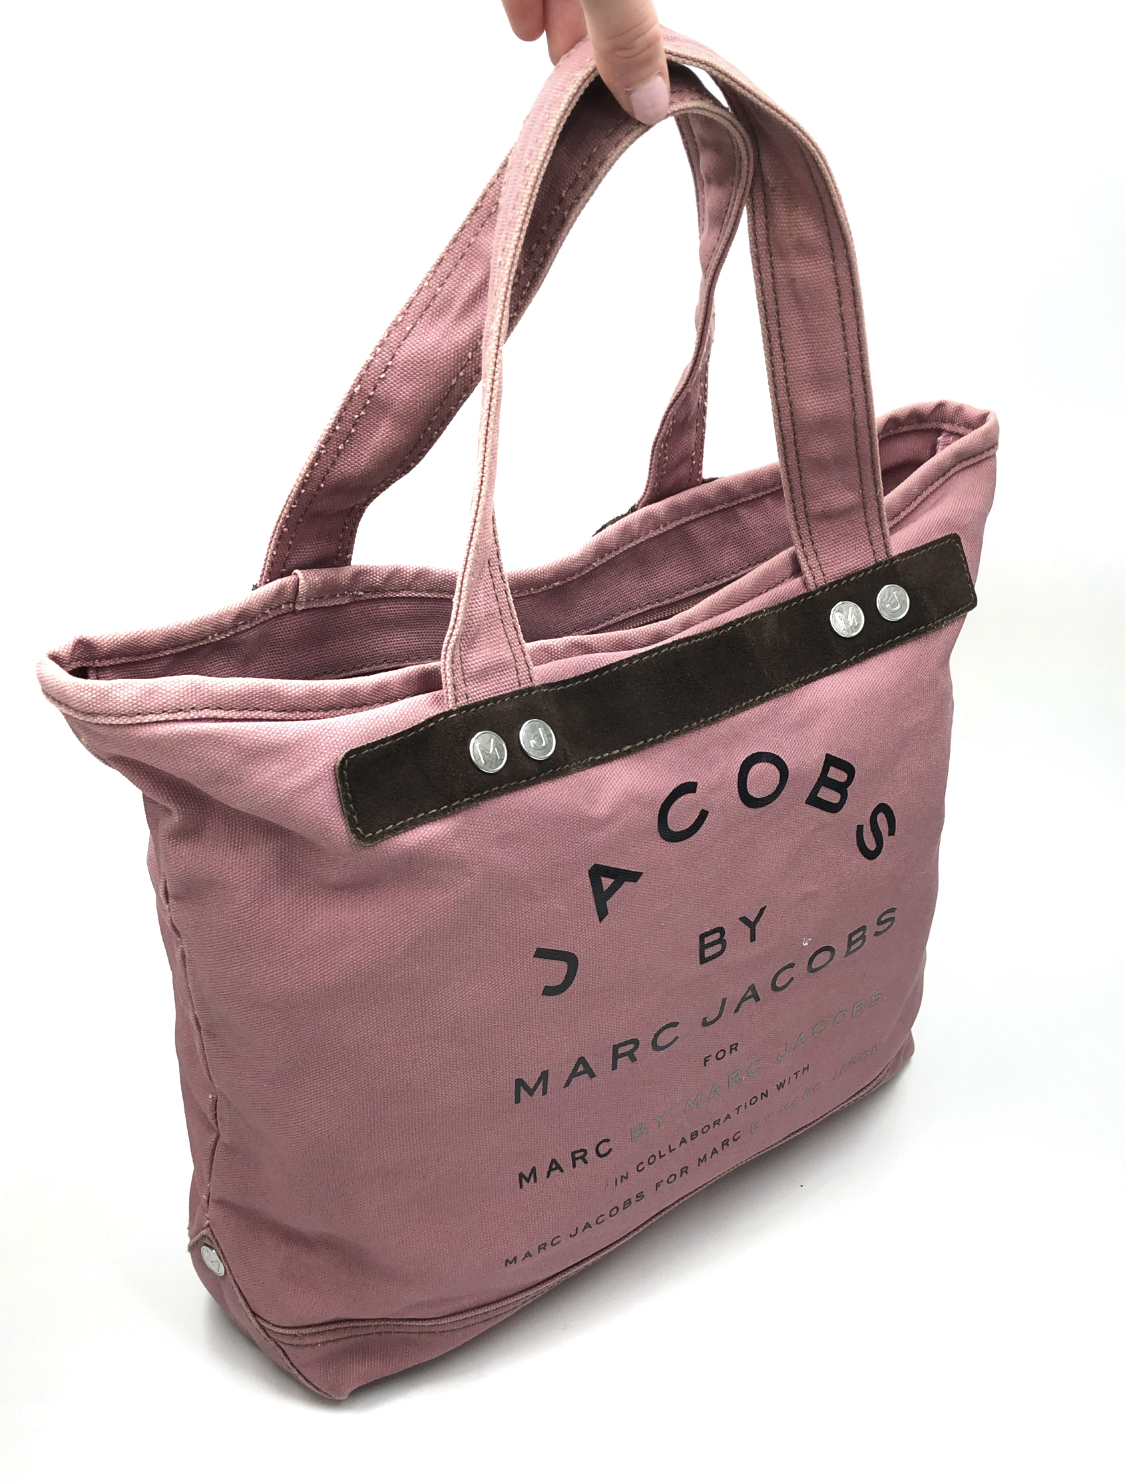 Marc by Marc Jacobs Light Purple Tote